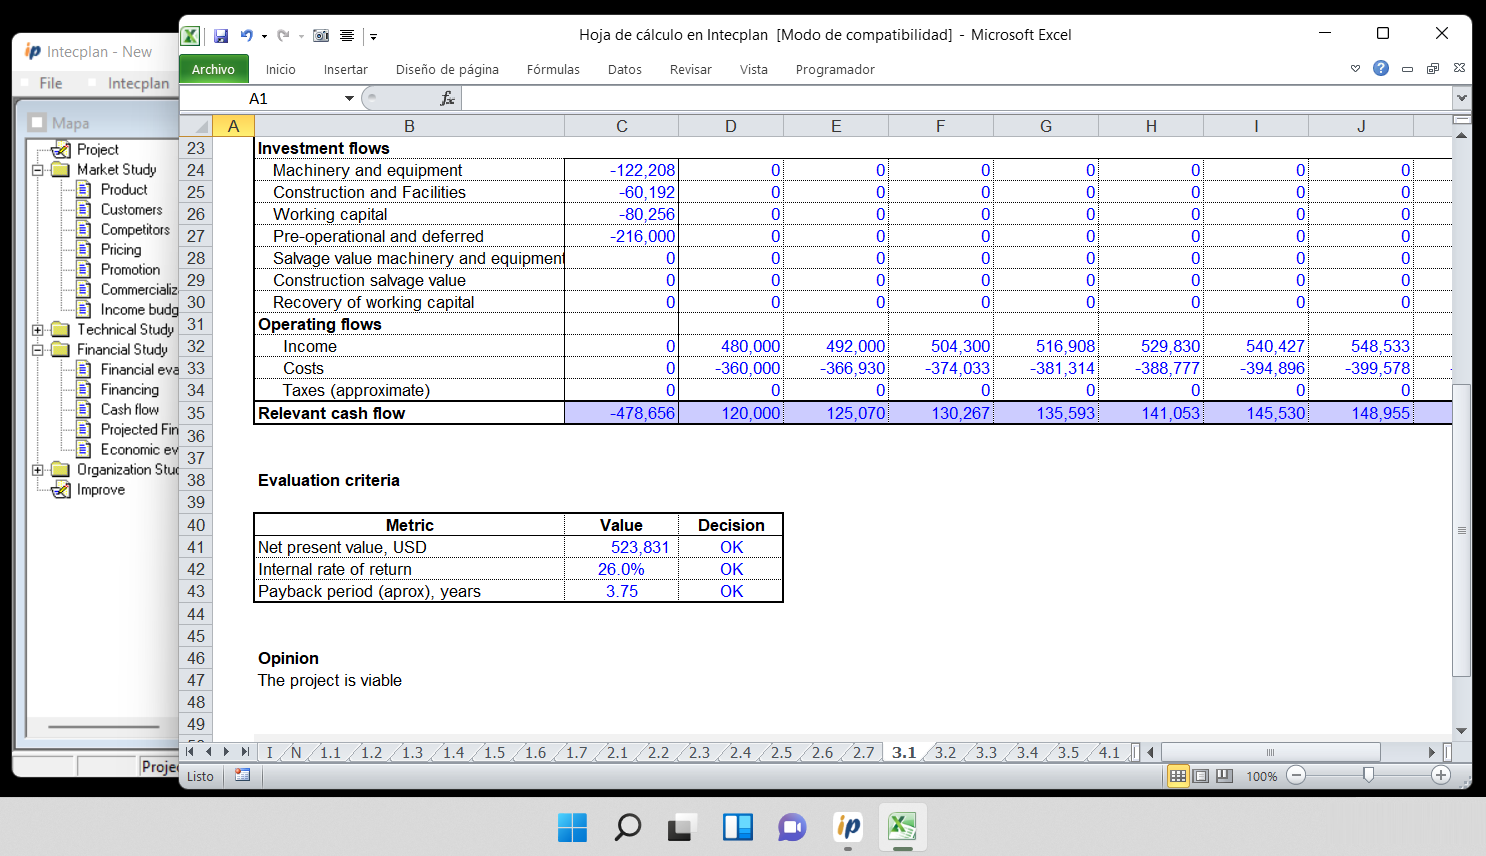 Excel Sheet. The financial projection obtains the profitability criteria NPV, IRR, recovery time, expected by the market. If you make changes to the budgets, you can check that they maintain the profitability acceptable to the market.